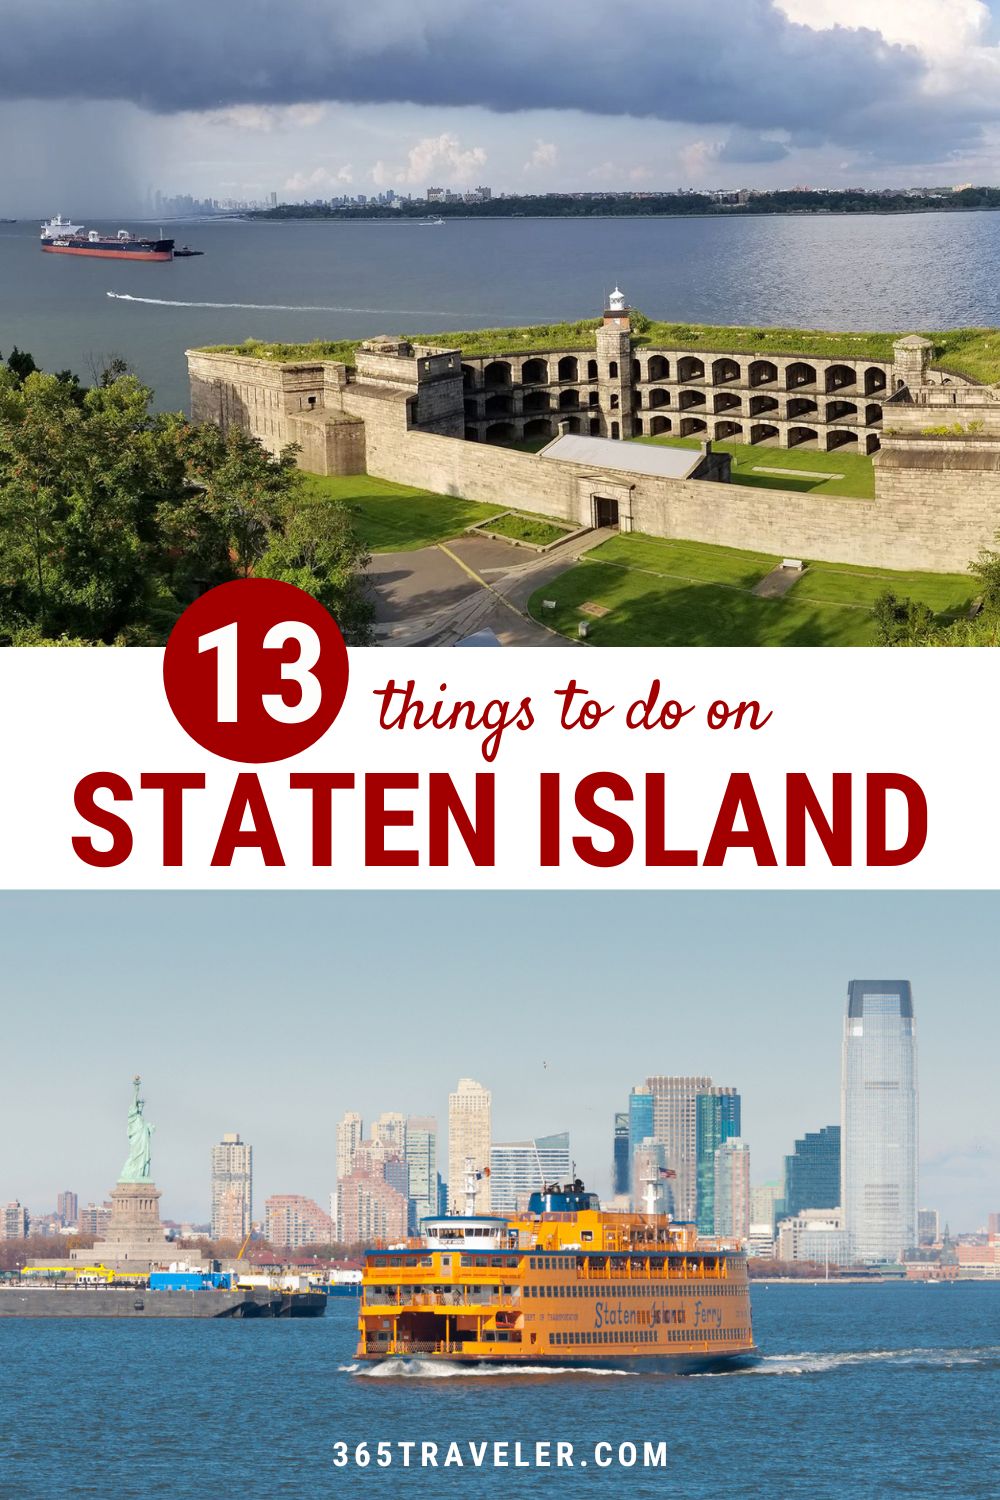 13 THINGS TO DO ON STATEN ISLAND YOU CAN'T MISS